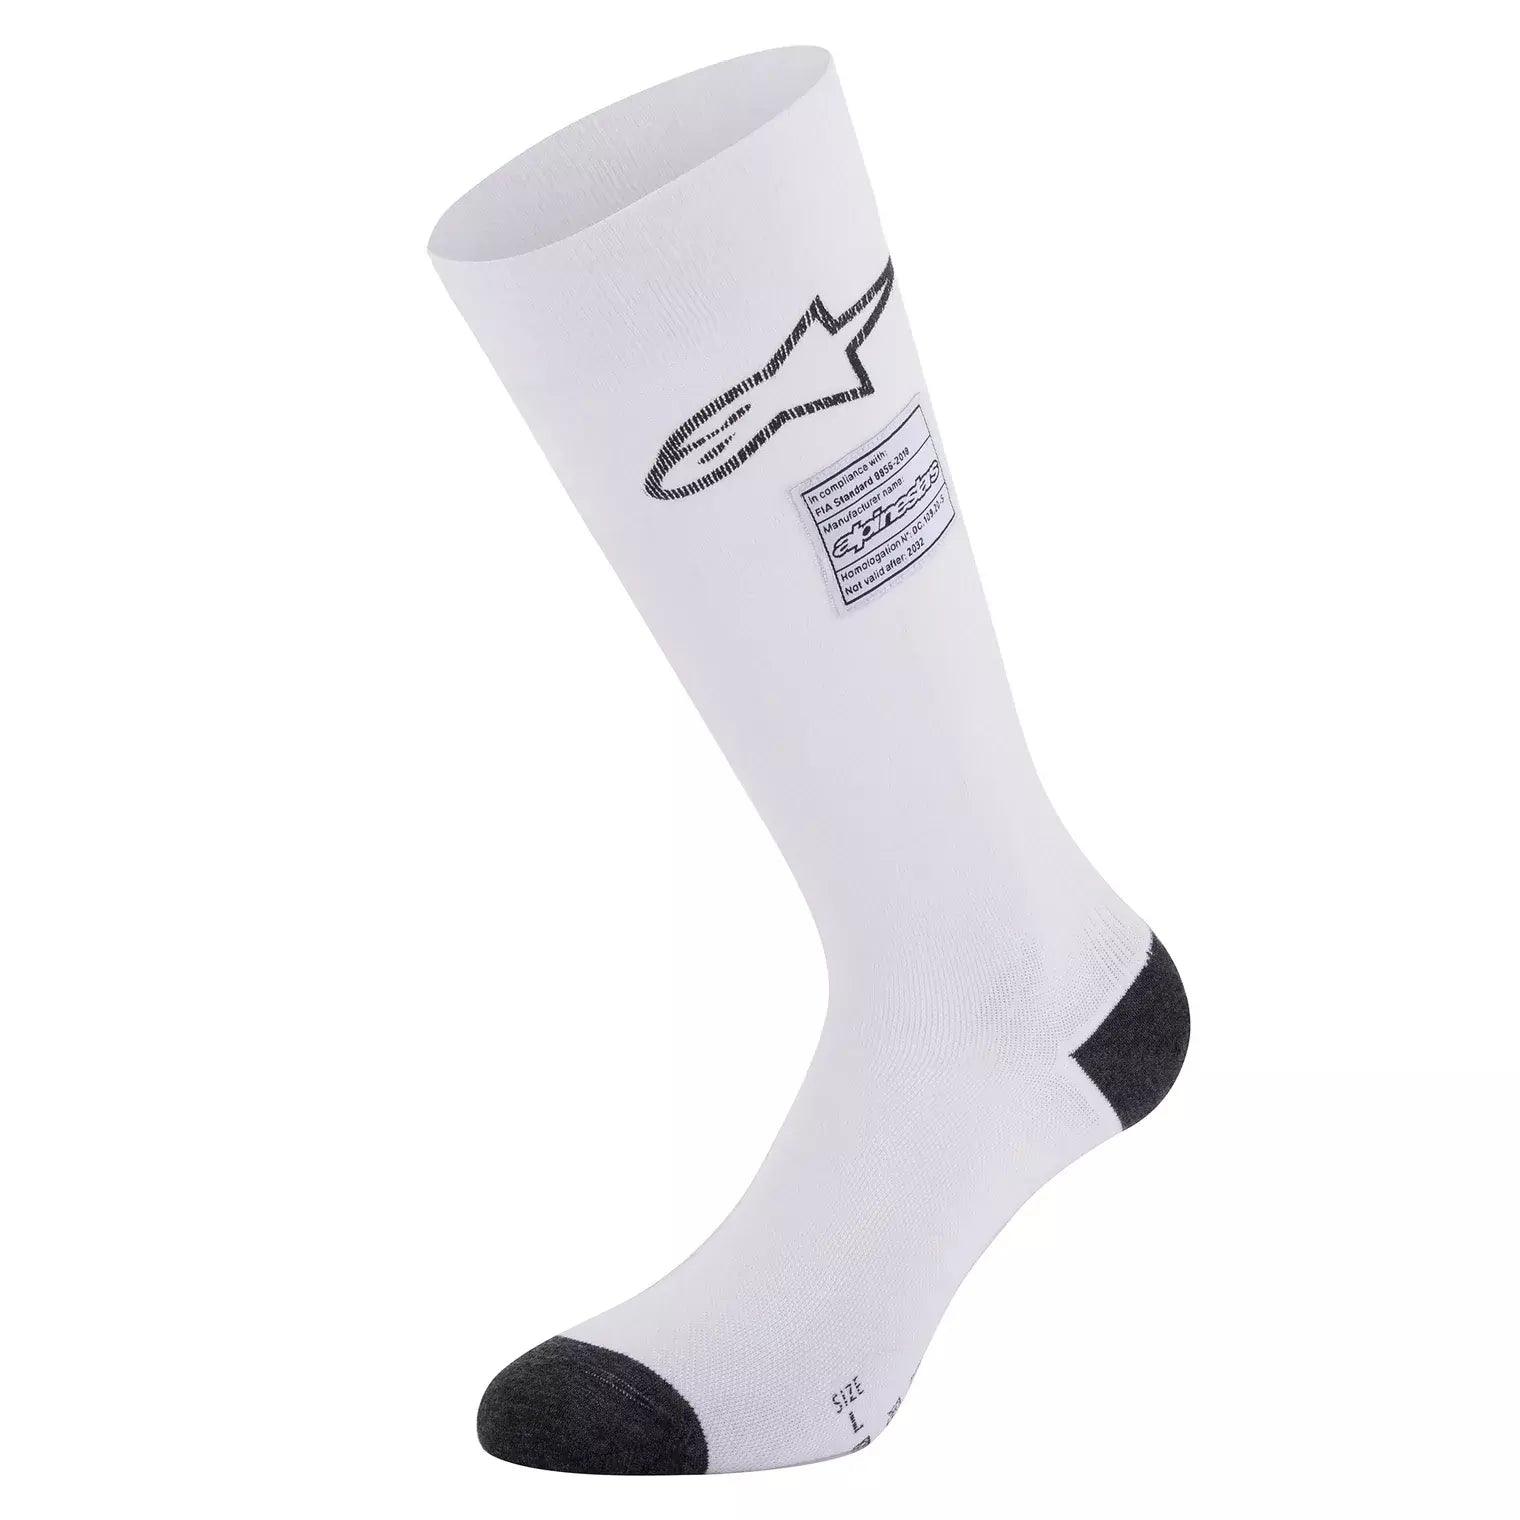 Socks ZX V4 White Small - Burlile Performance Products